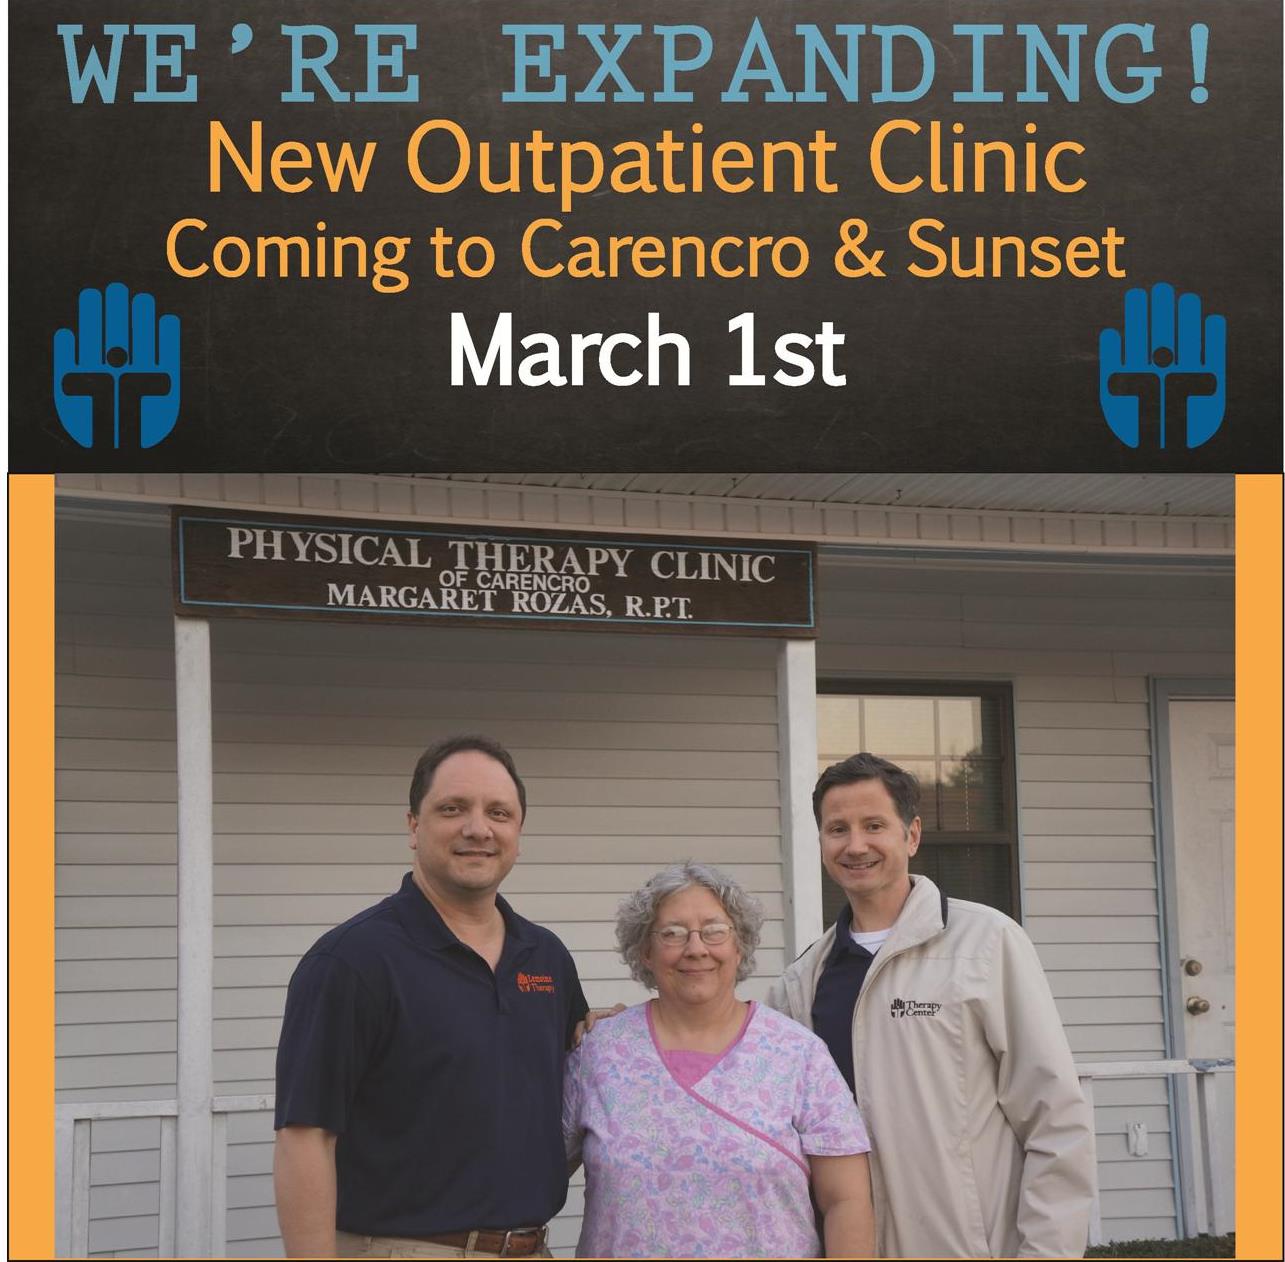 Carencro Sunset Outpatient CLinic Therapy Center